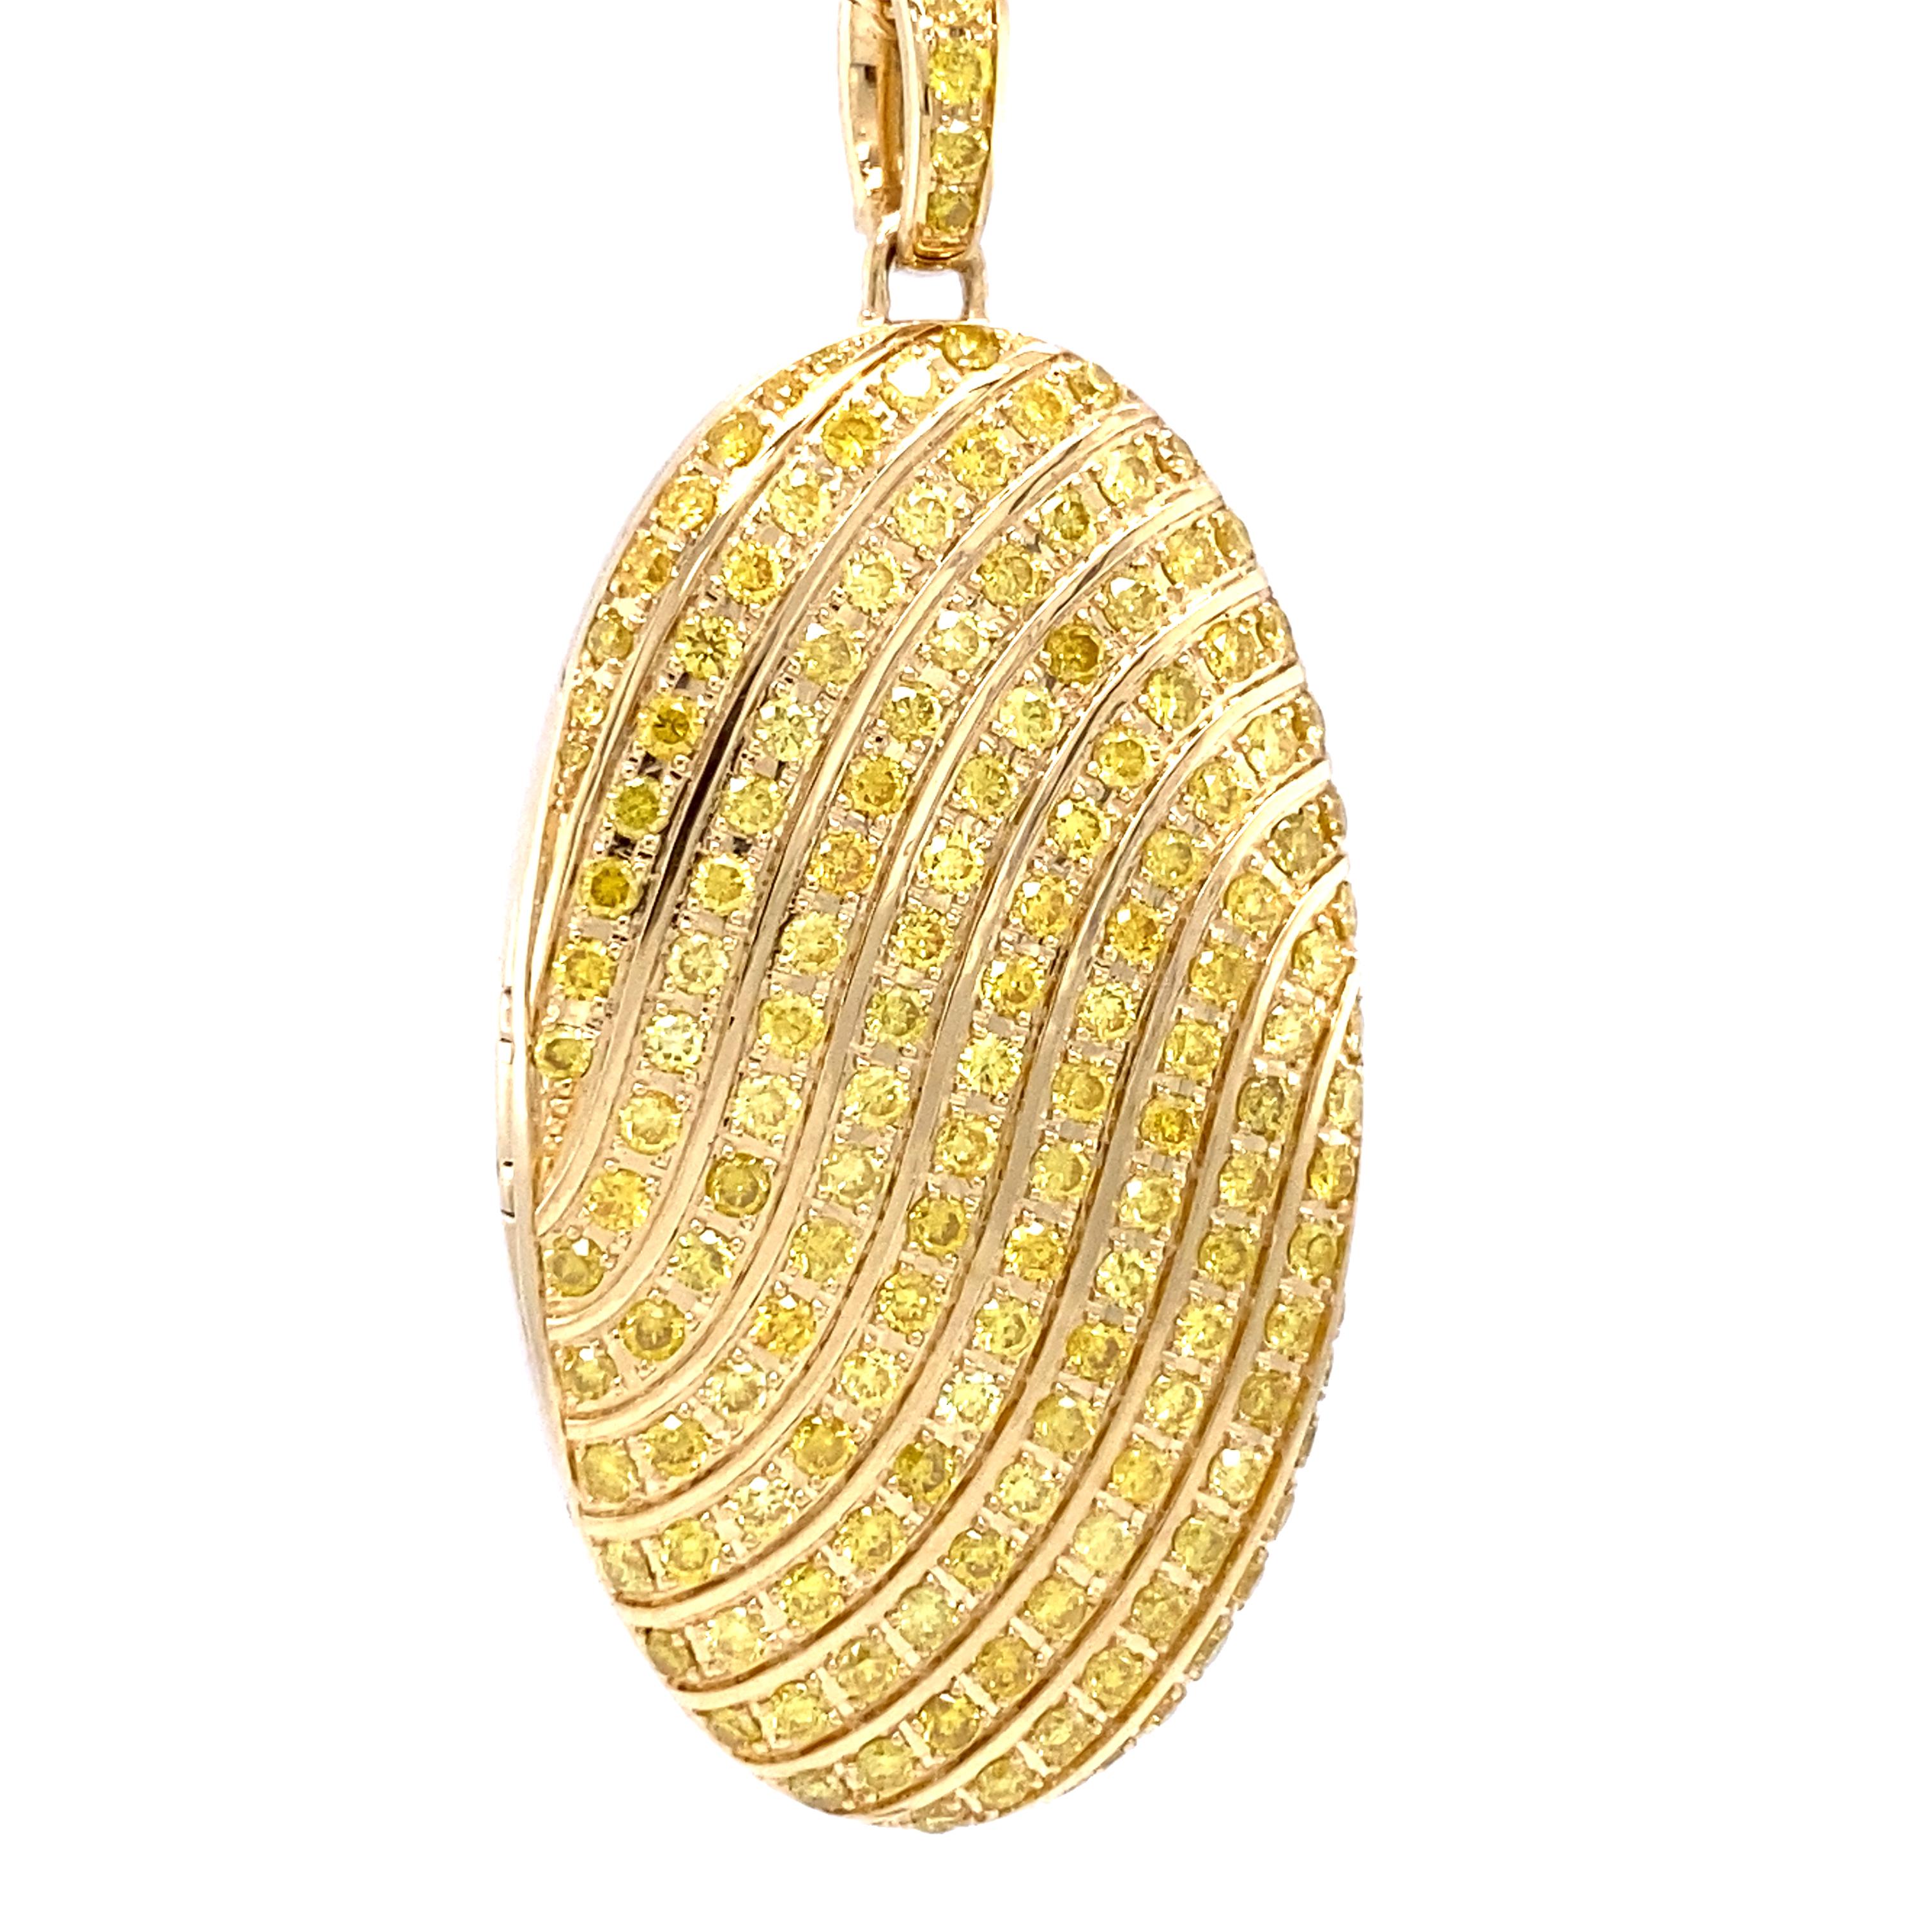 Victor Mayer Calima Locket Necklace in 18k Yellow Gold 155 Fancy Yellow Diamonds For Sale 3